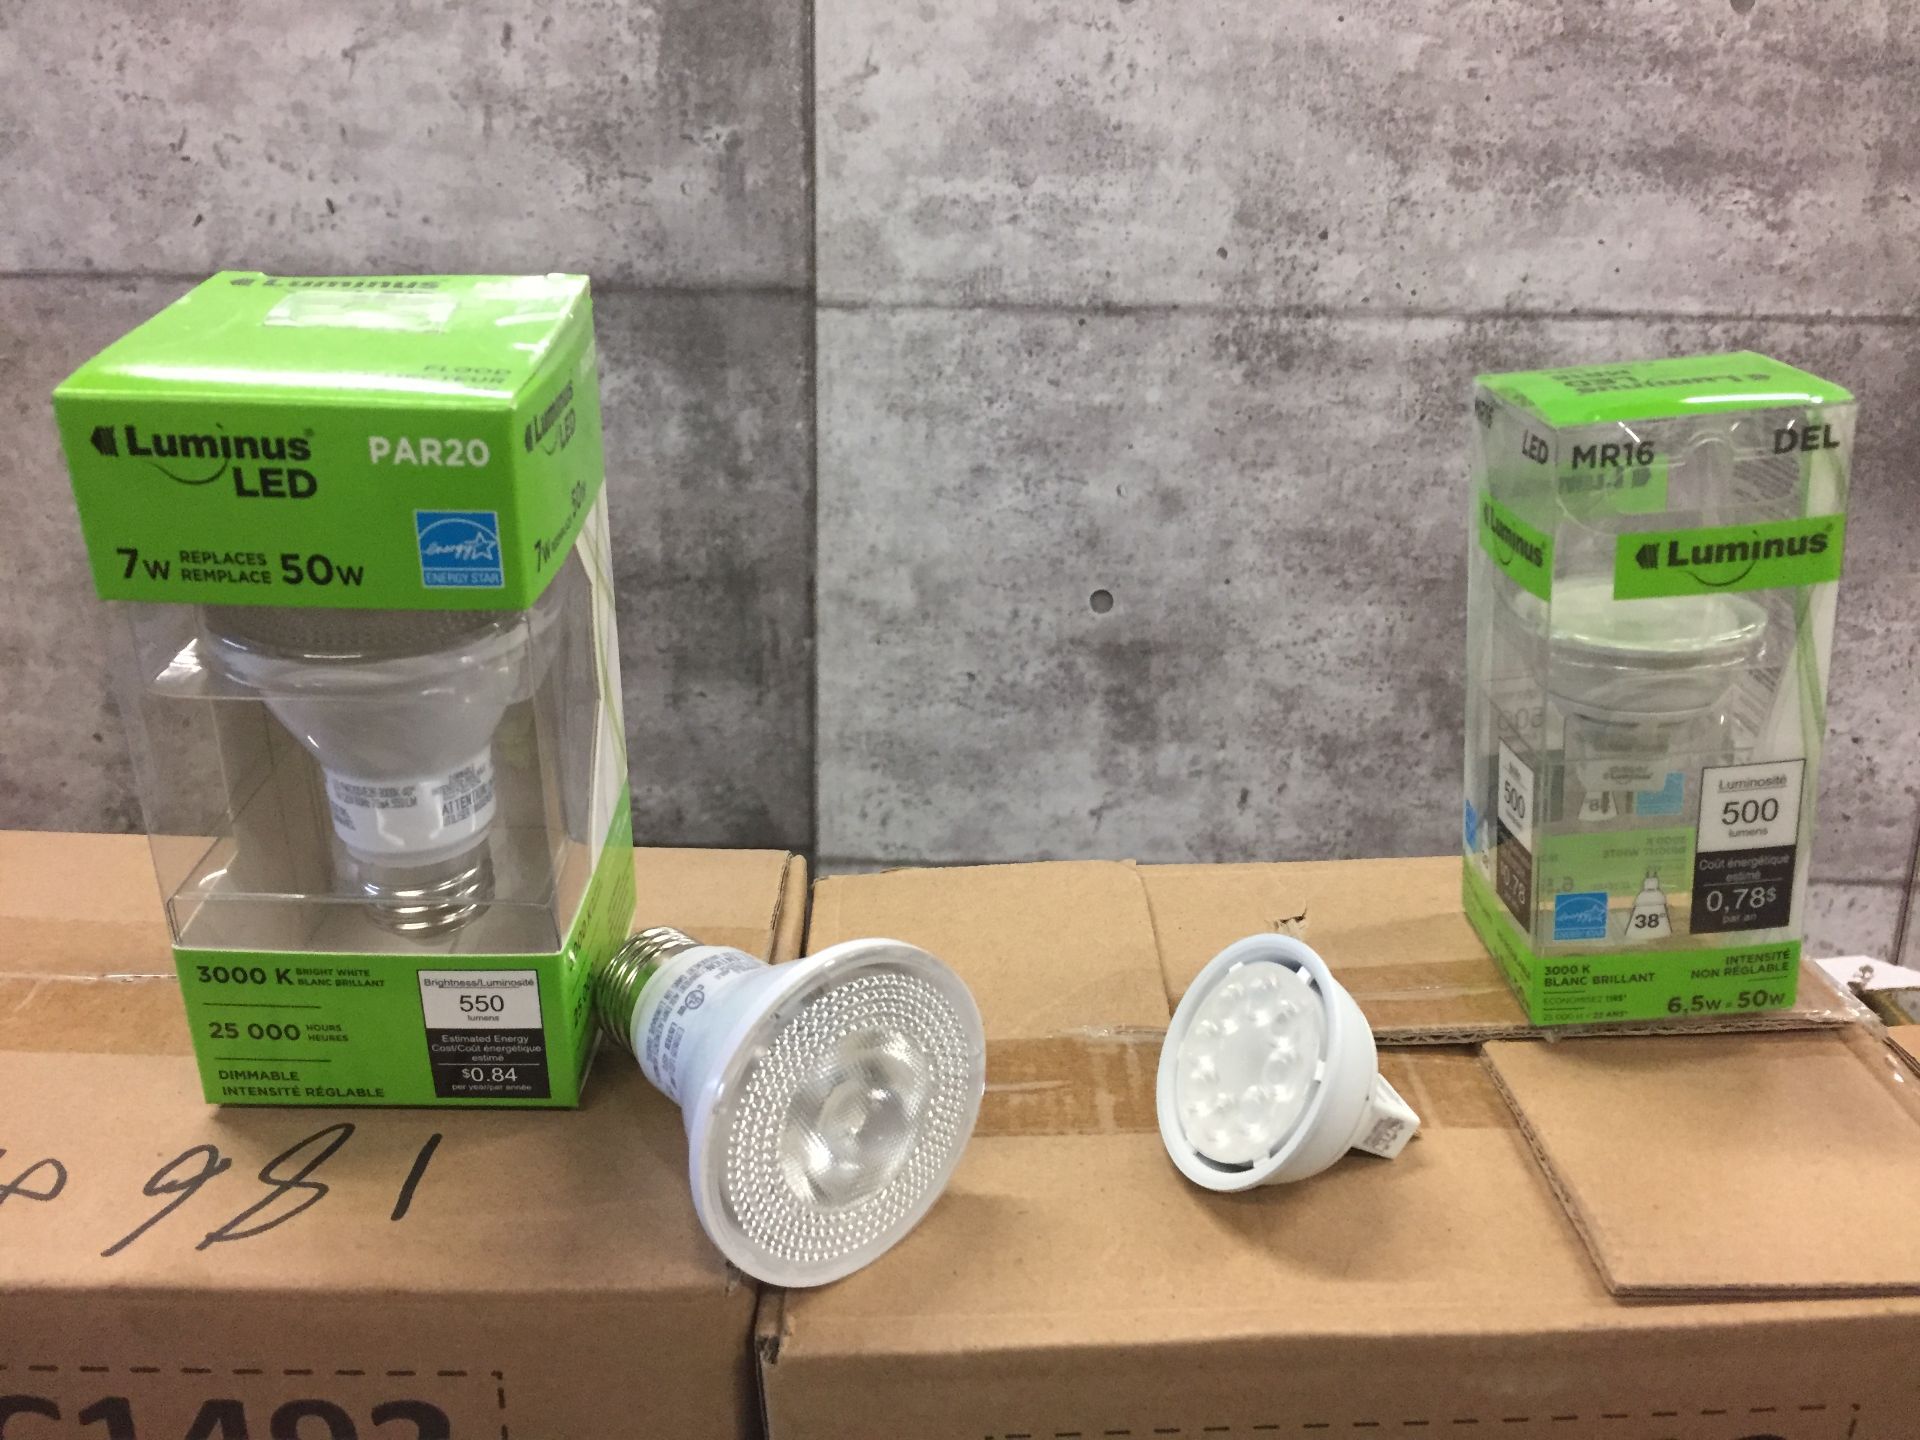 LUMINUS LED PARZO BULBS - VARIOUS MODELS (BIDDING IS PER LIGHT, MULTIPLIED BY QTY)